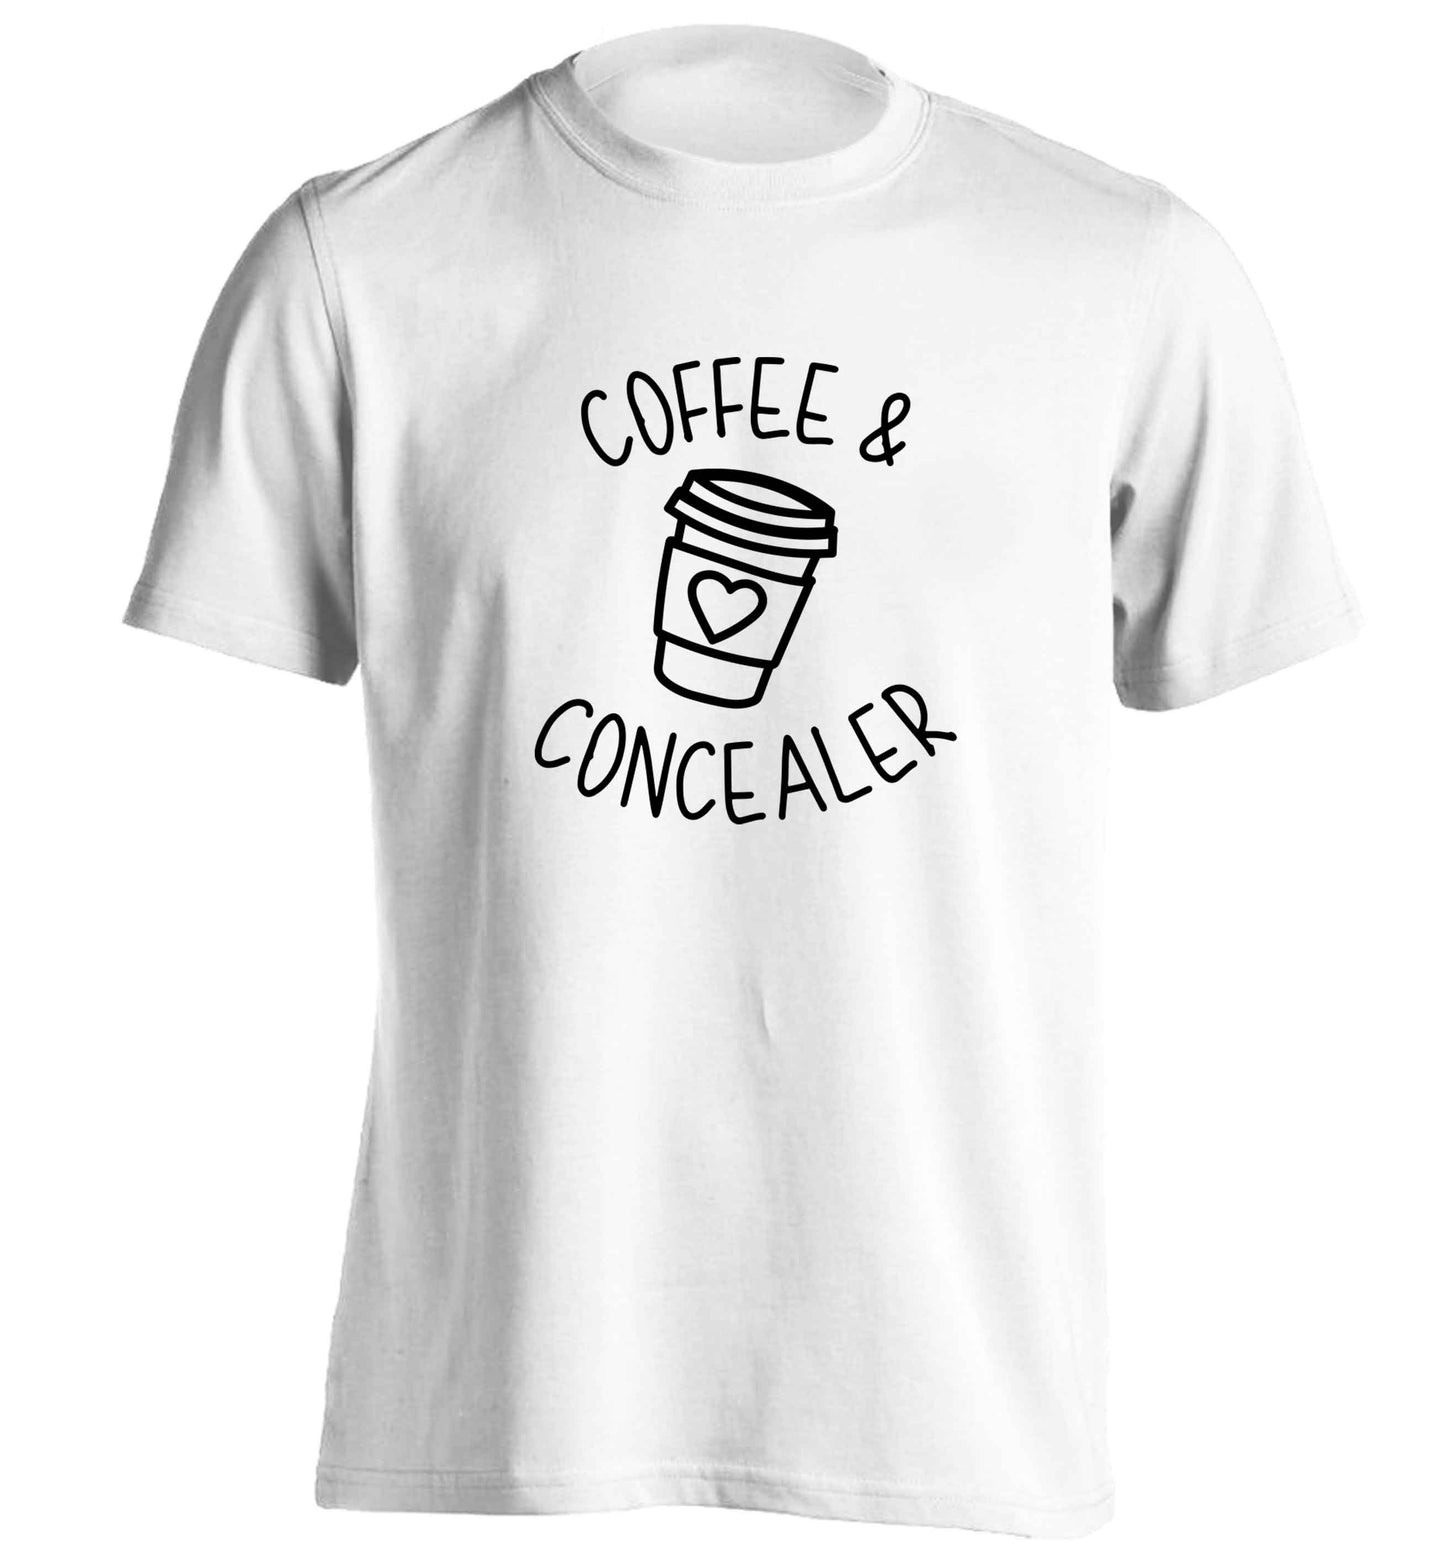 Coffee and concealer adults unisex white Tshirt 2XL